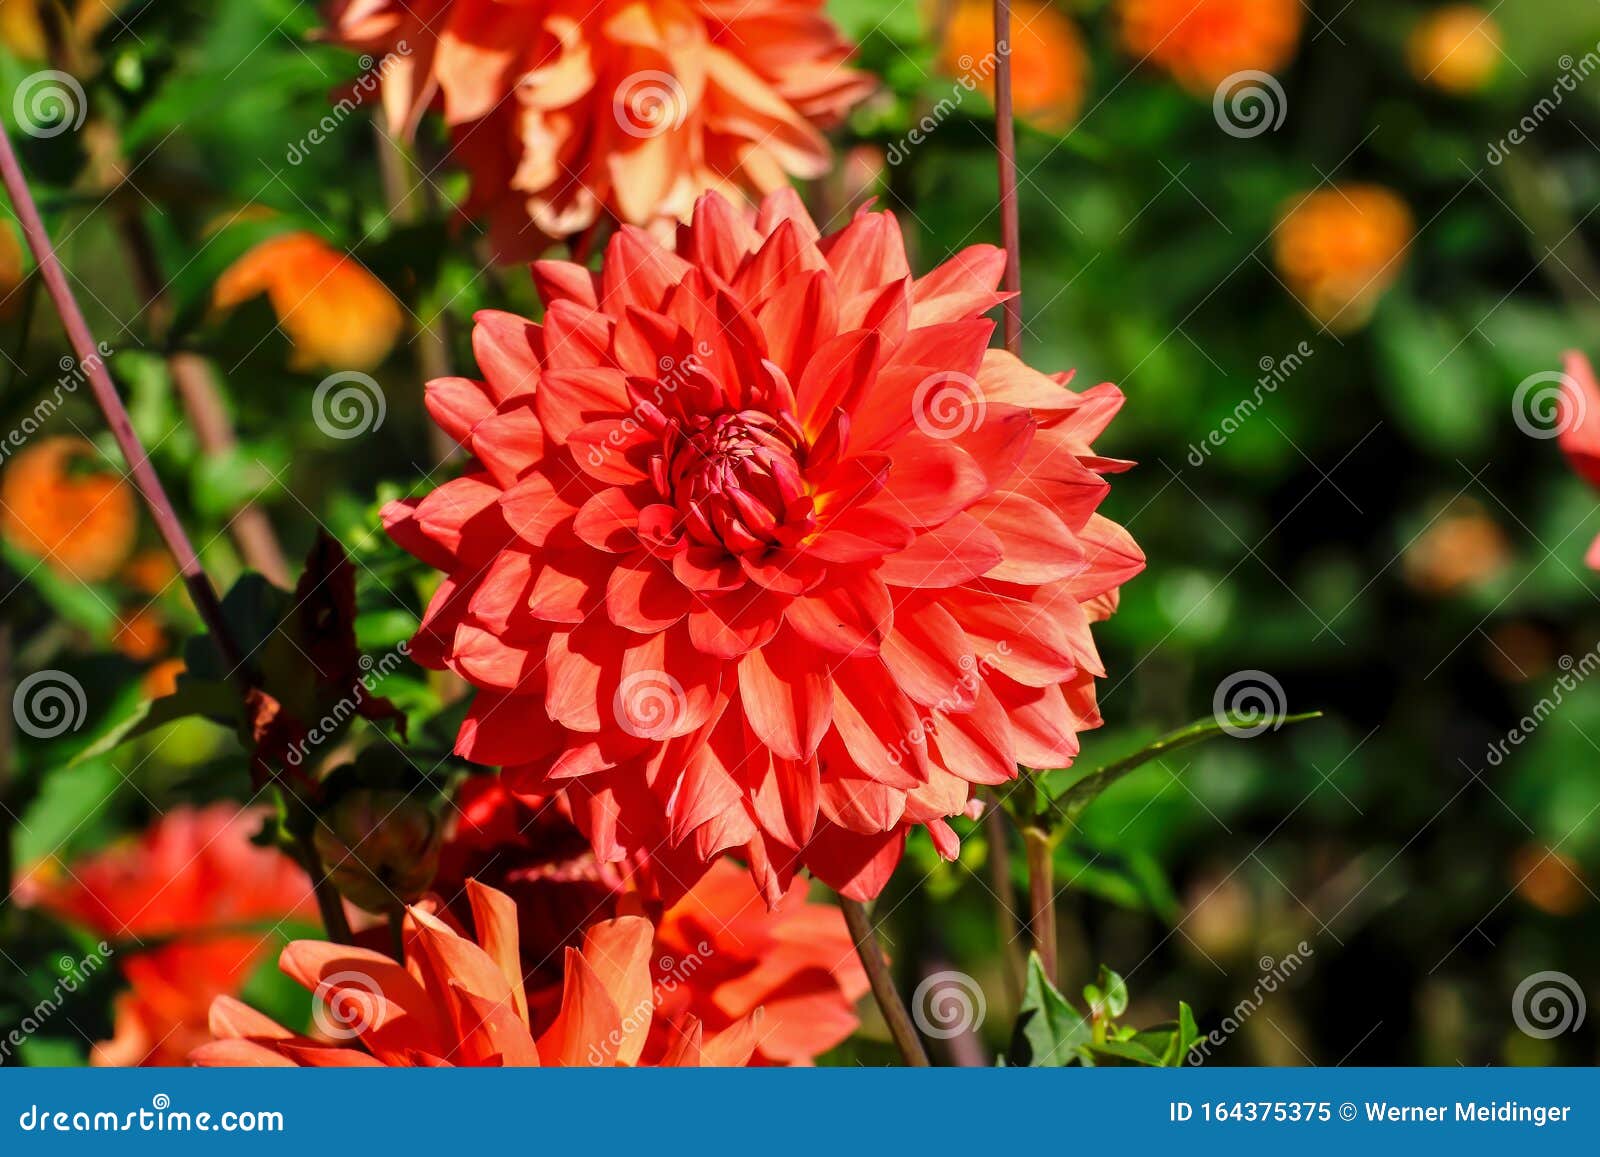 flower of the dahlia egon ehlers in late summer and autumn